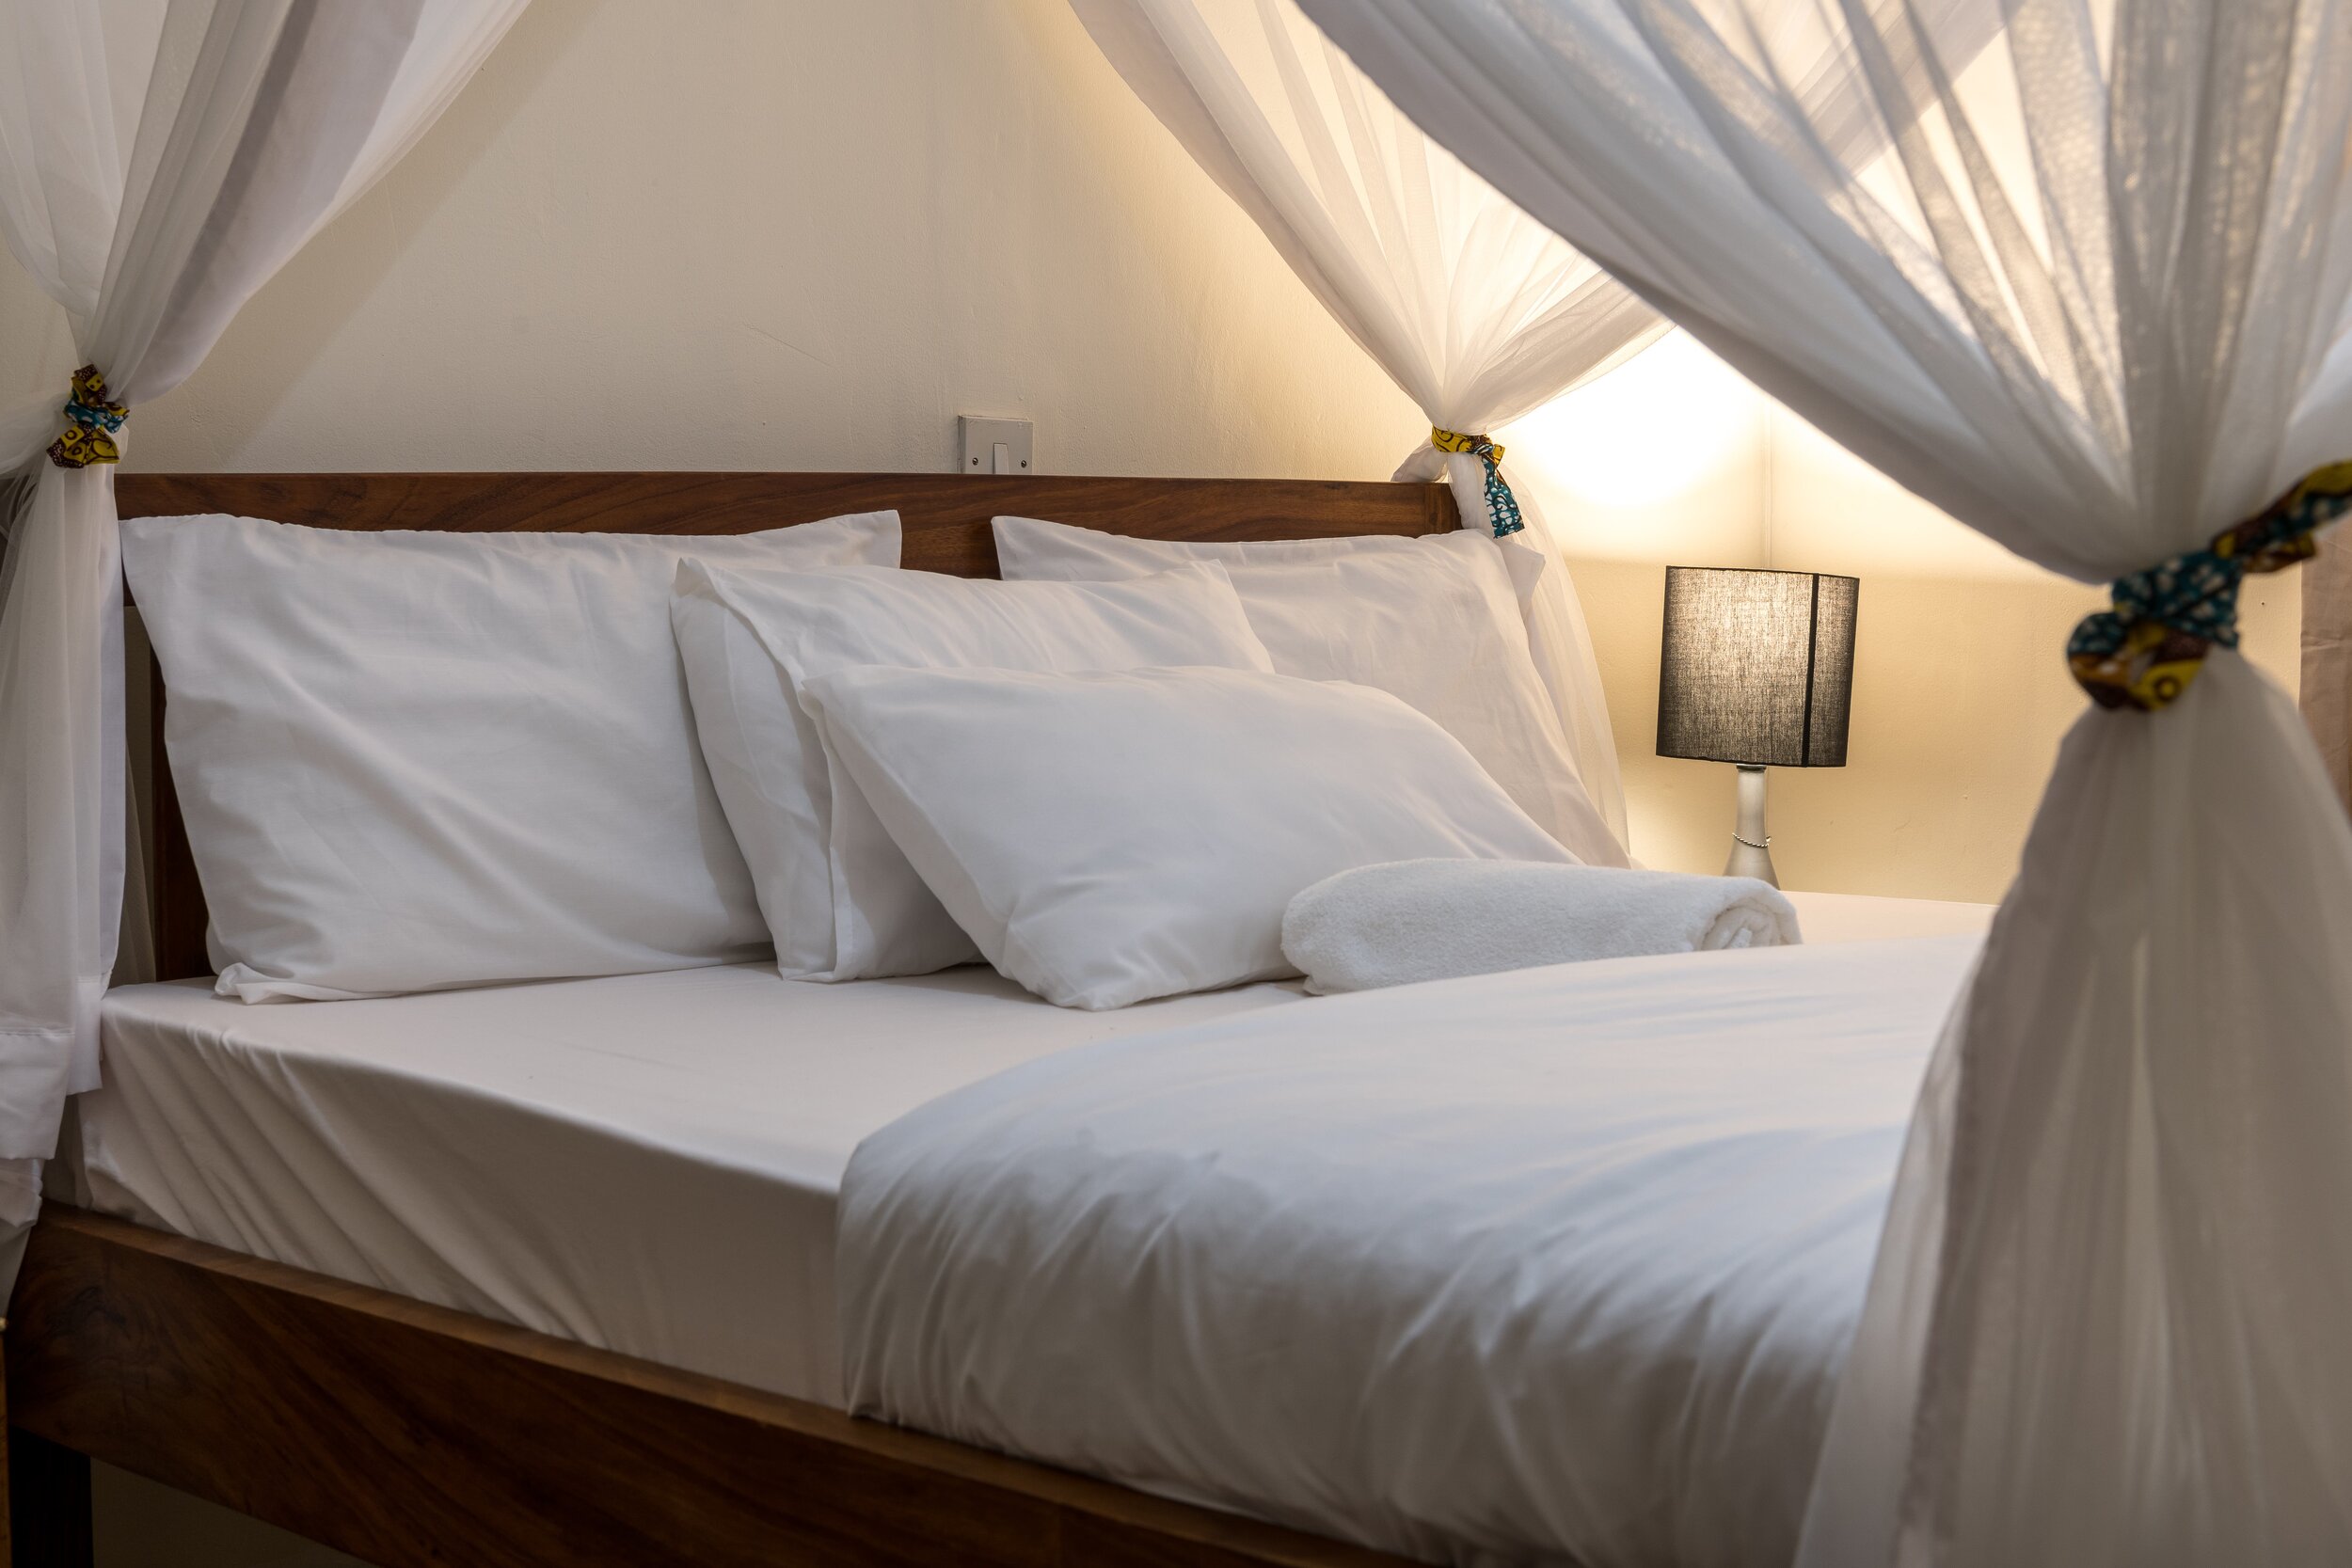 Guesthouse bed and breakfast accommodation with wooden king size bed, white bed linen, mosquito net and bedside lamp